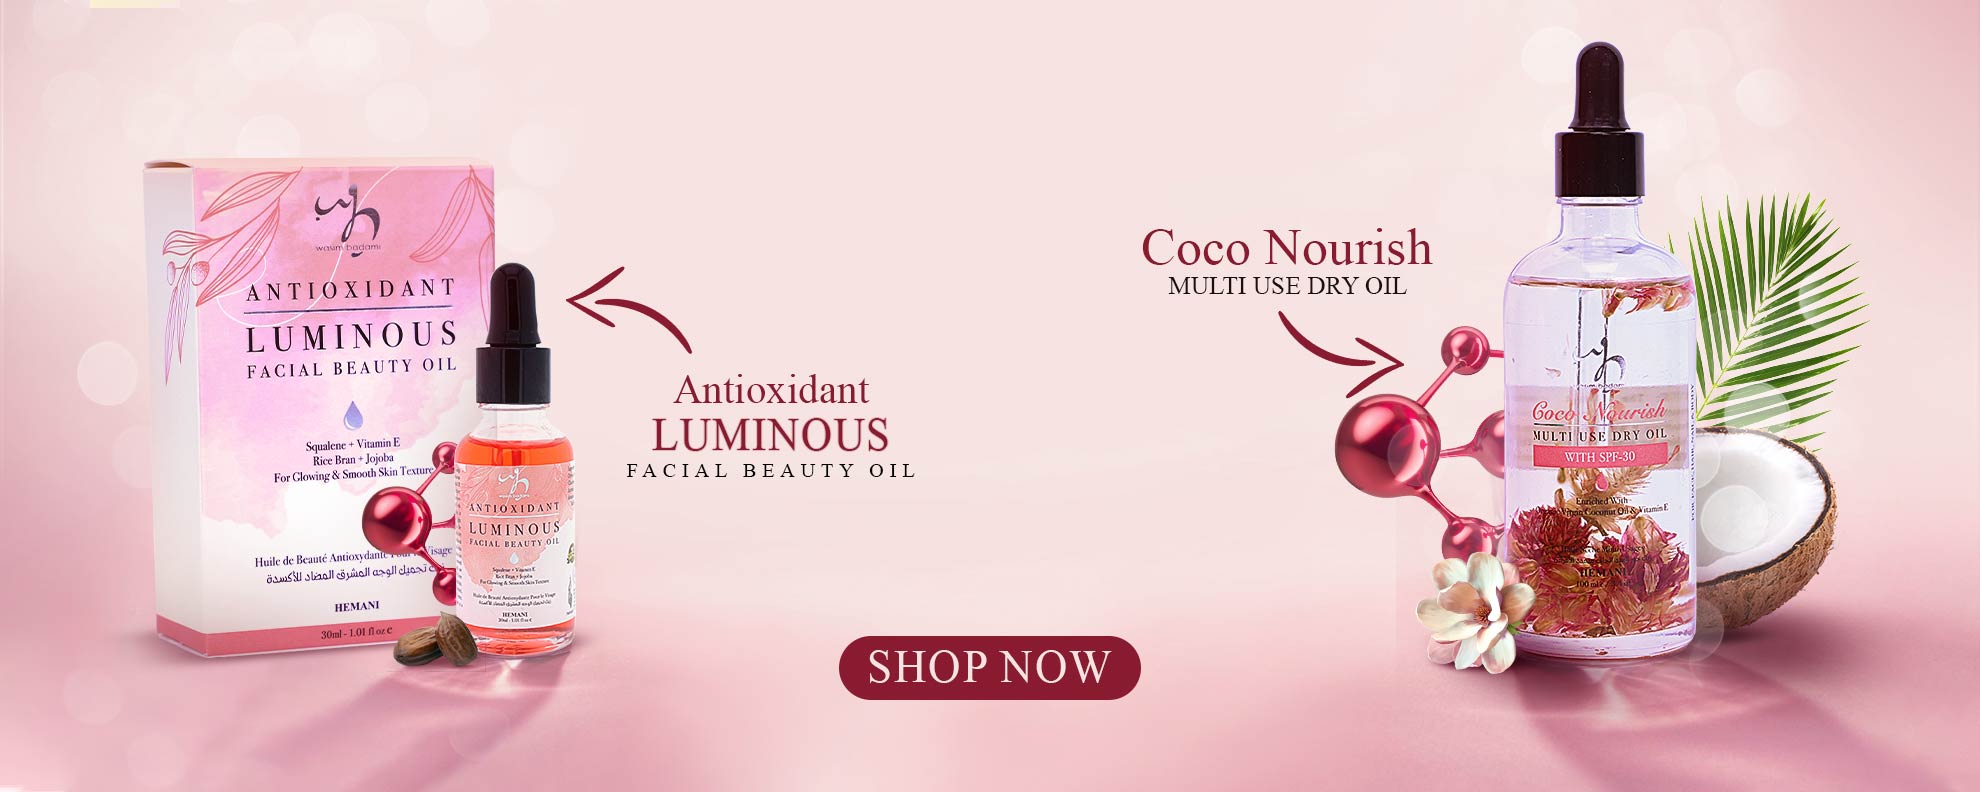 Shop WB by Hemani's Beauty Oils - Antioxidant Luminous Facial Beauty Oil & Coco Nourish Multi Use Dry Oil with SPF 